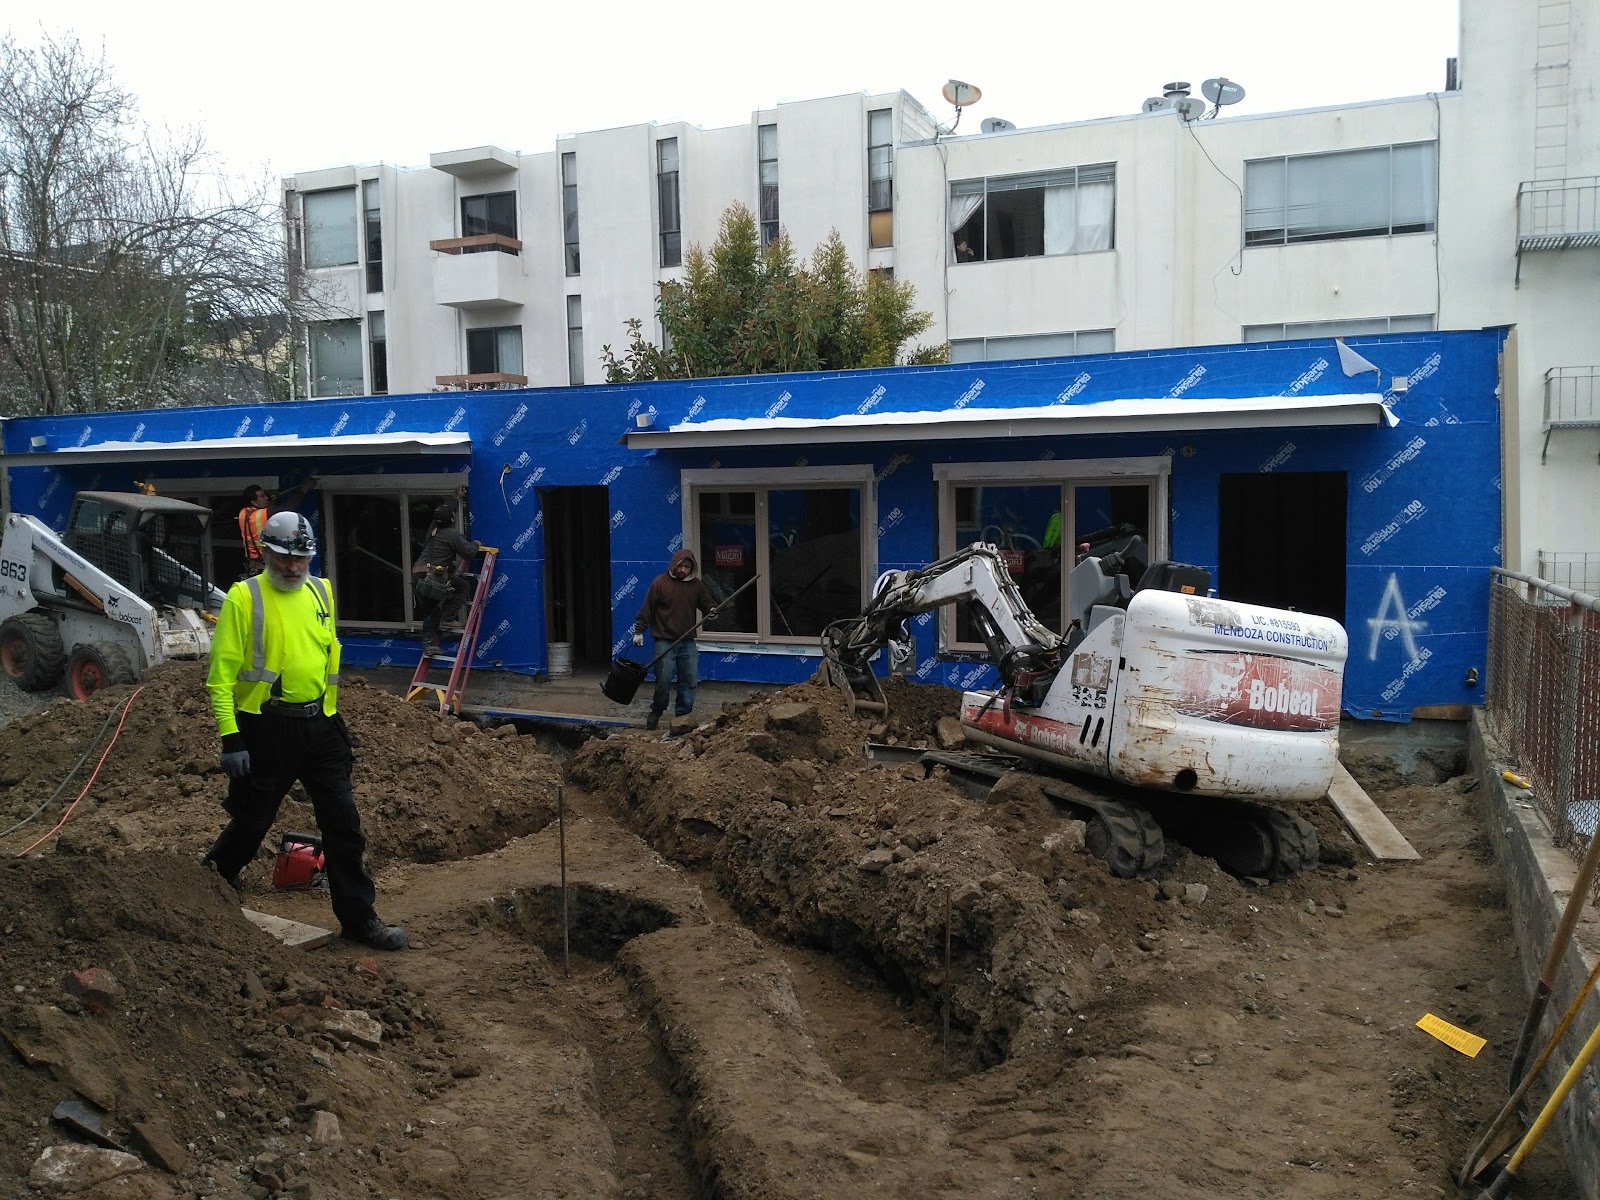 accessory dwelling units under construction